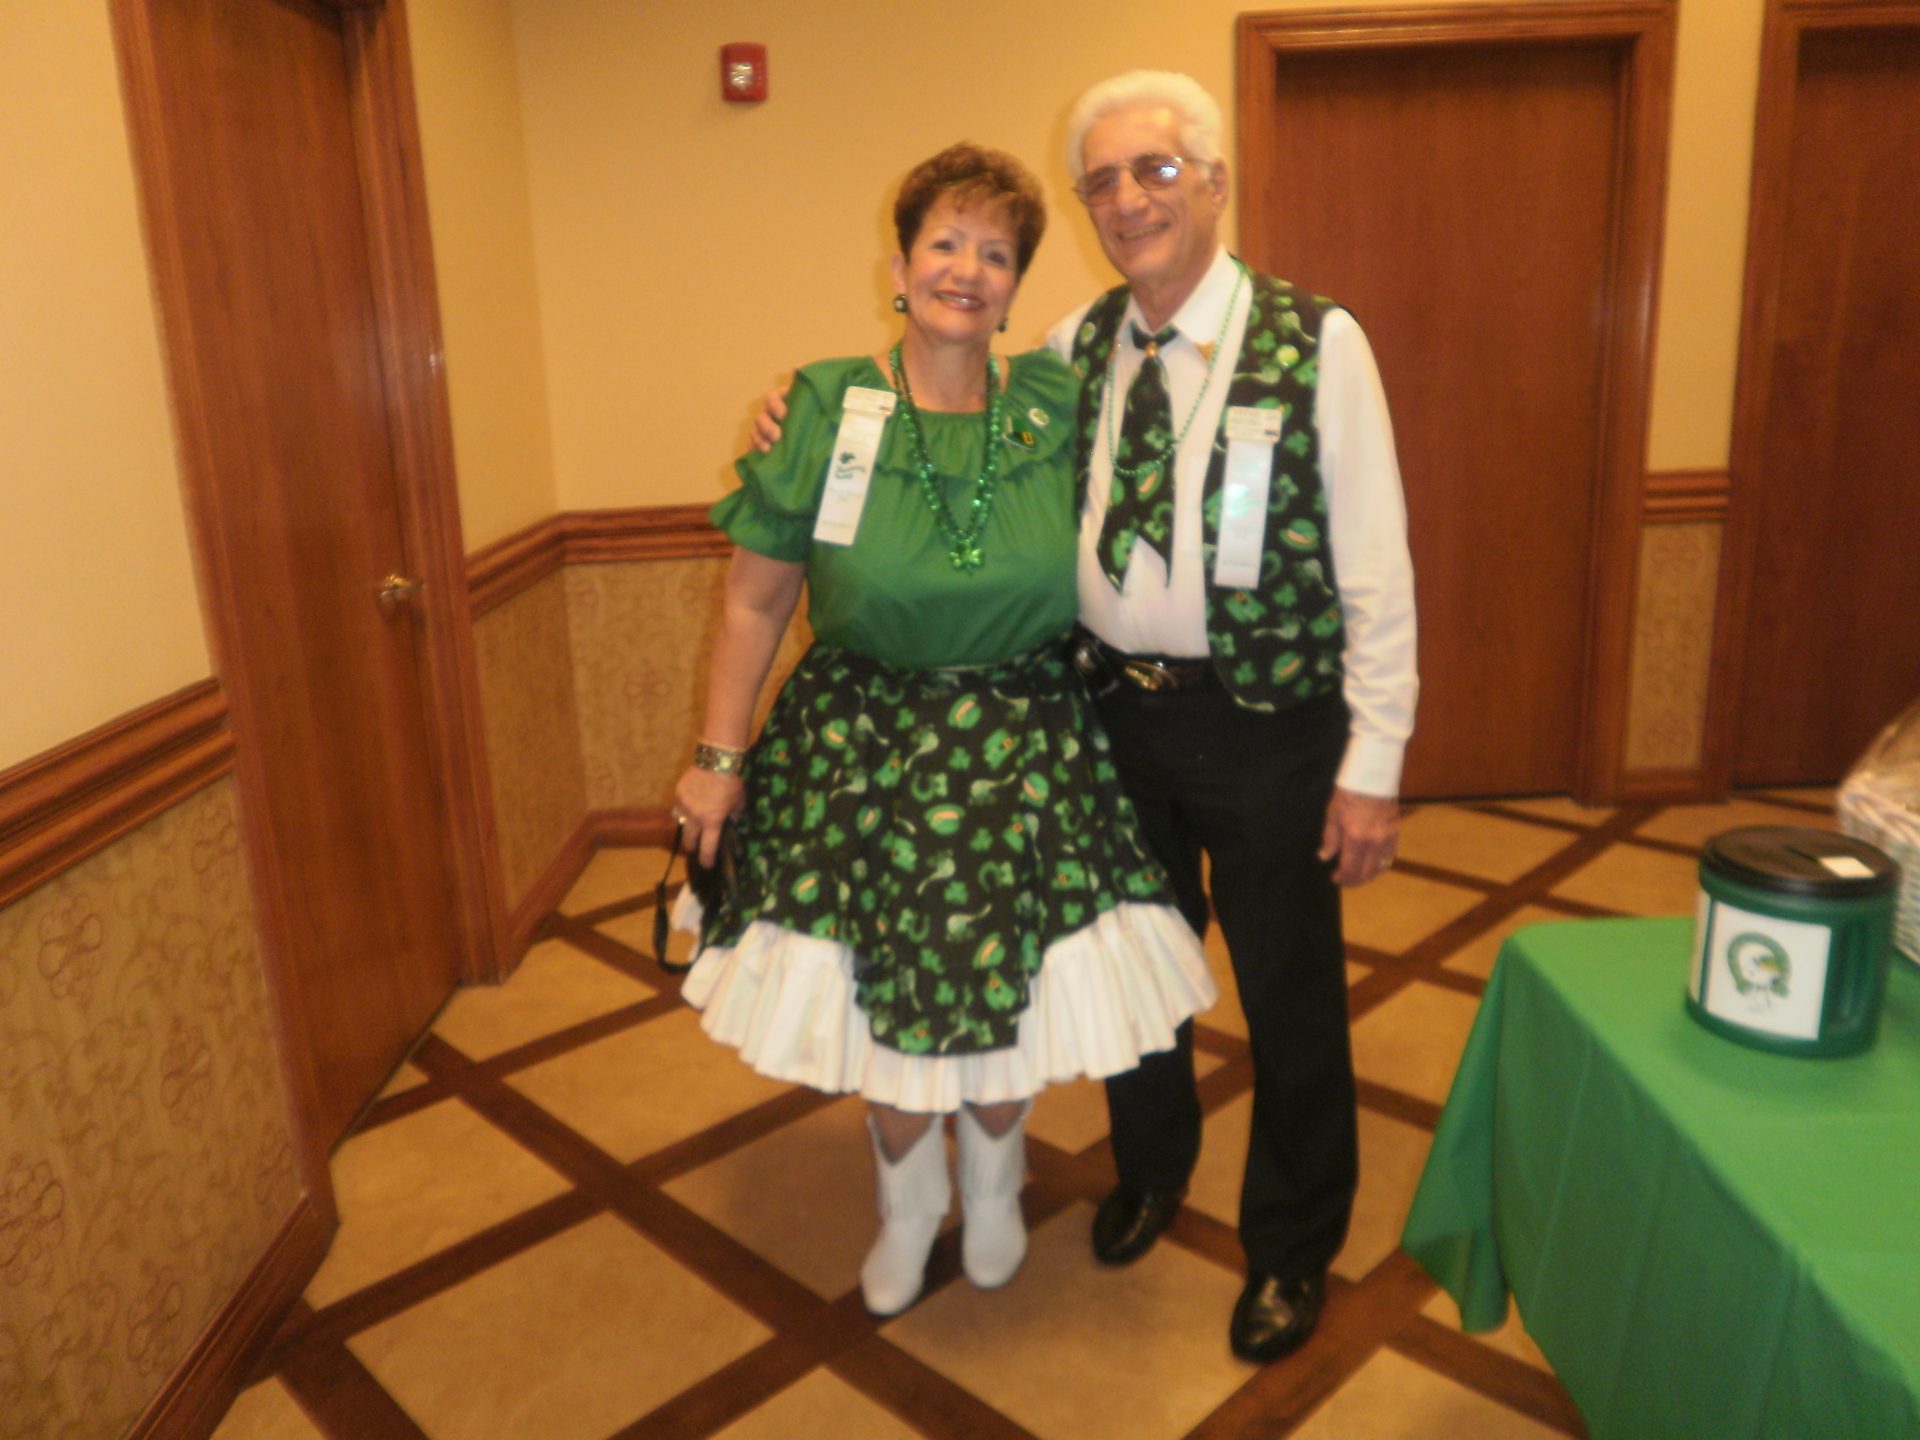 One of his favorite dances was the St. Patty's dance.   Vinnie never had to worry where to take me for our anniversary. lol!